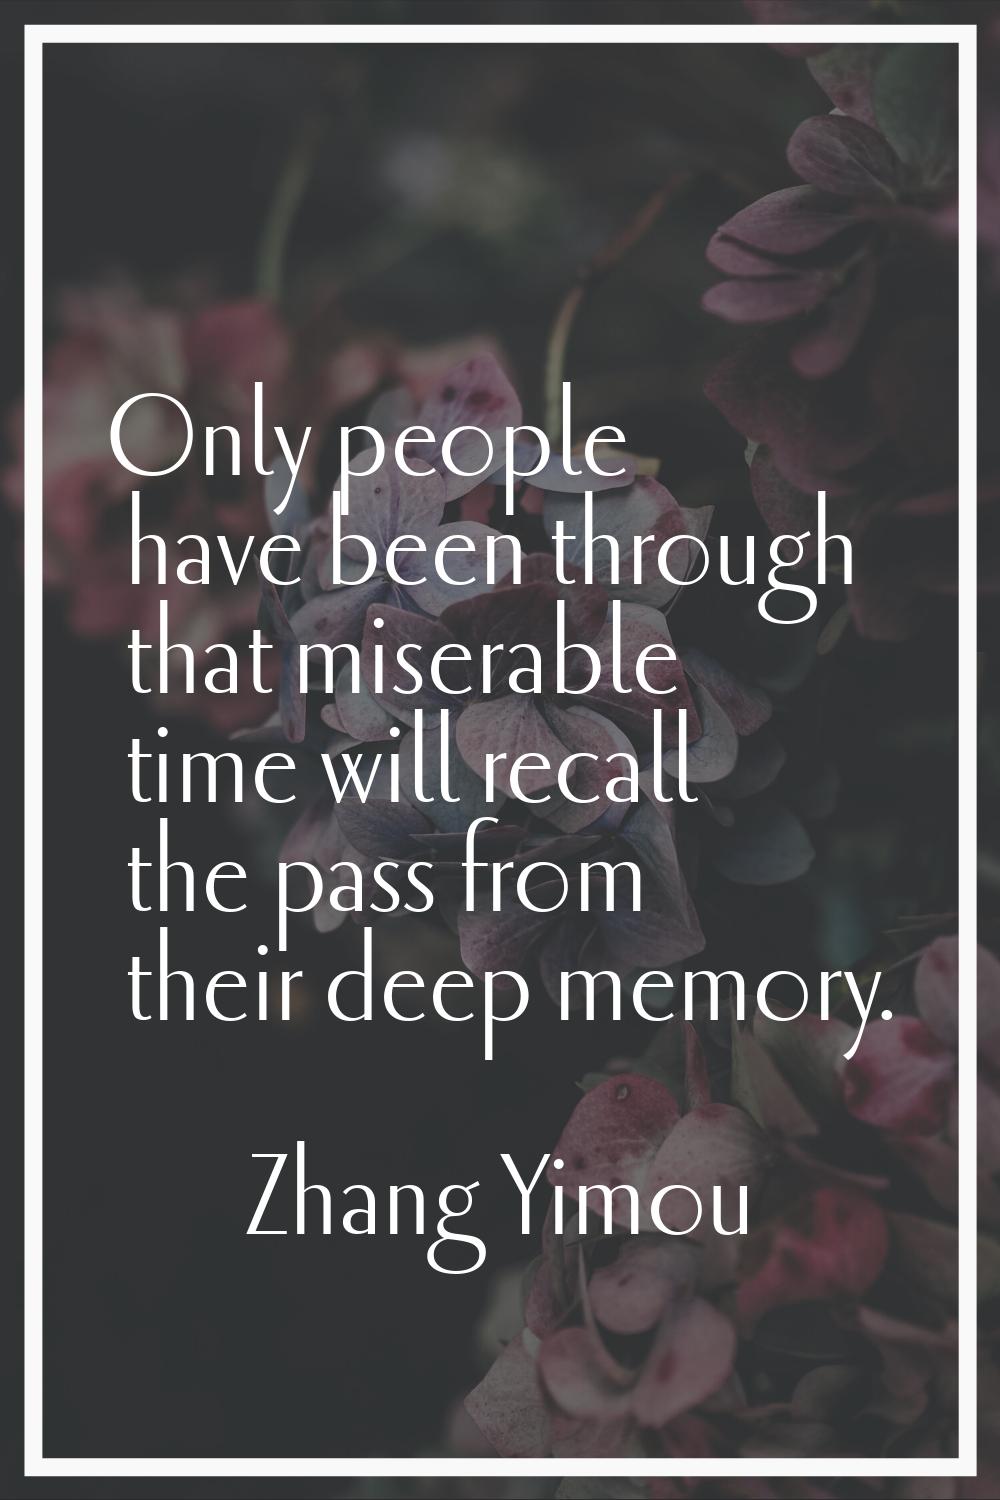 Only people have been through that miserable time will recall the pass from their deep memory.